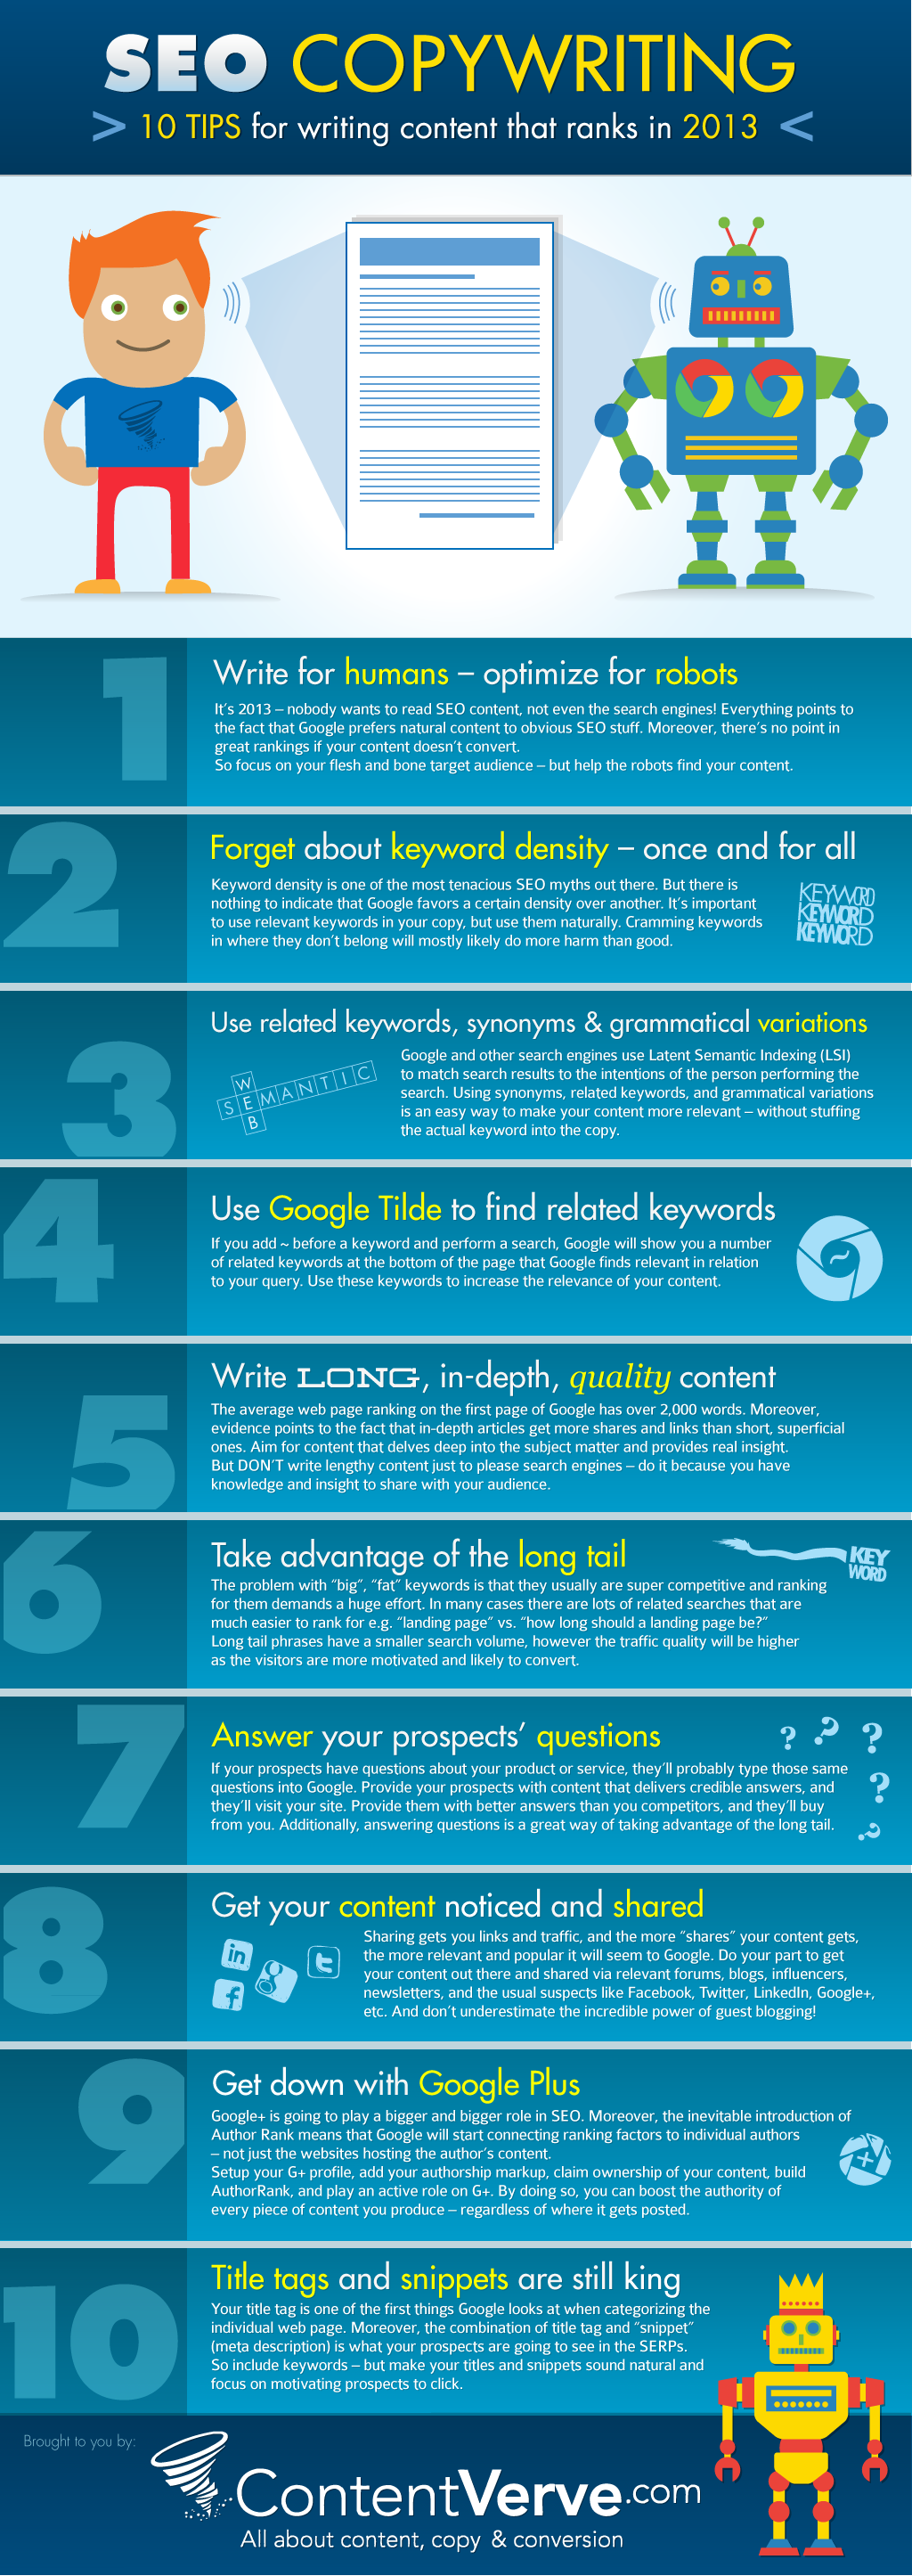 SEO-Copywriting-–-10-tips-for-writing-content-that-ranks-in-2013